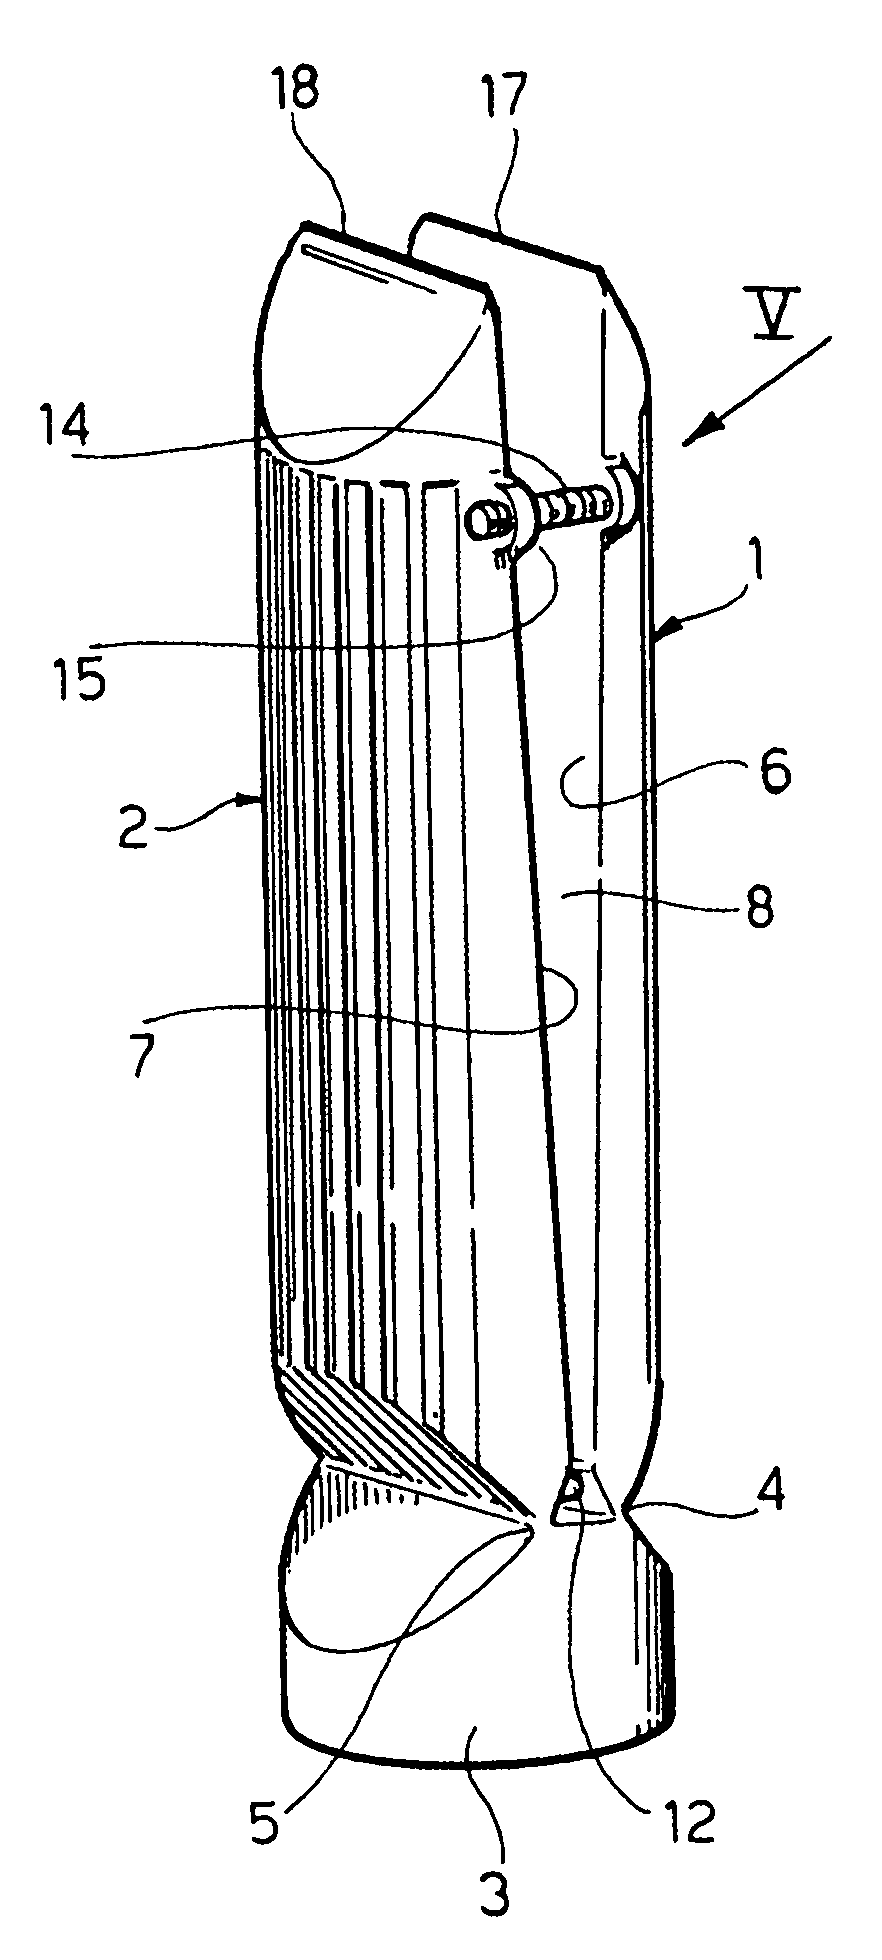 Device for dispensing fluid and semi-dense substances packaged in flexible sealed sachets